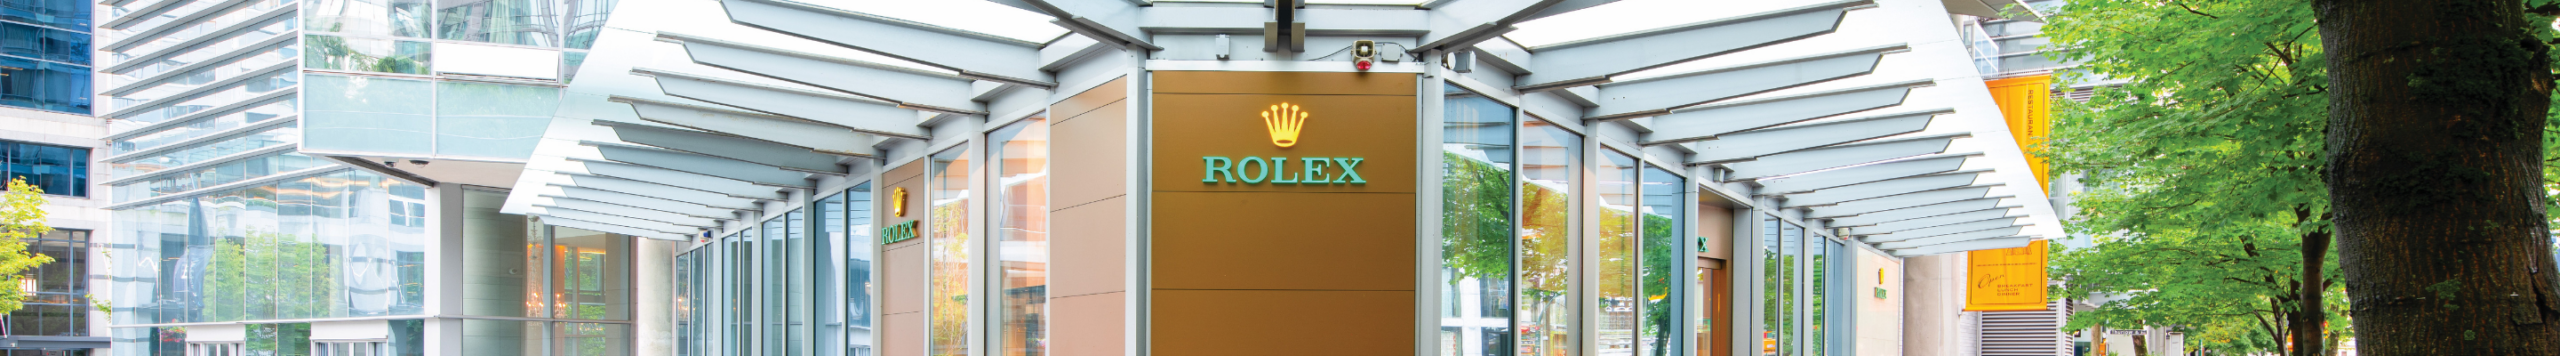 Our Rolex Showroom at Global Watch Company in Vancouver